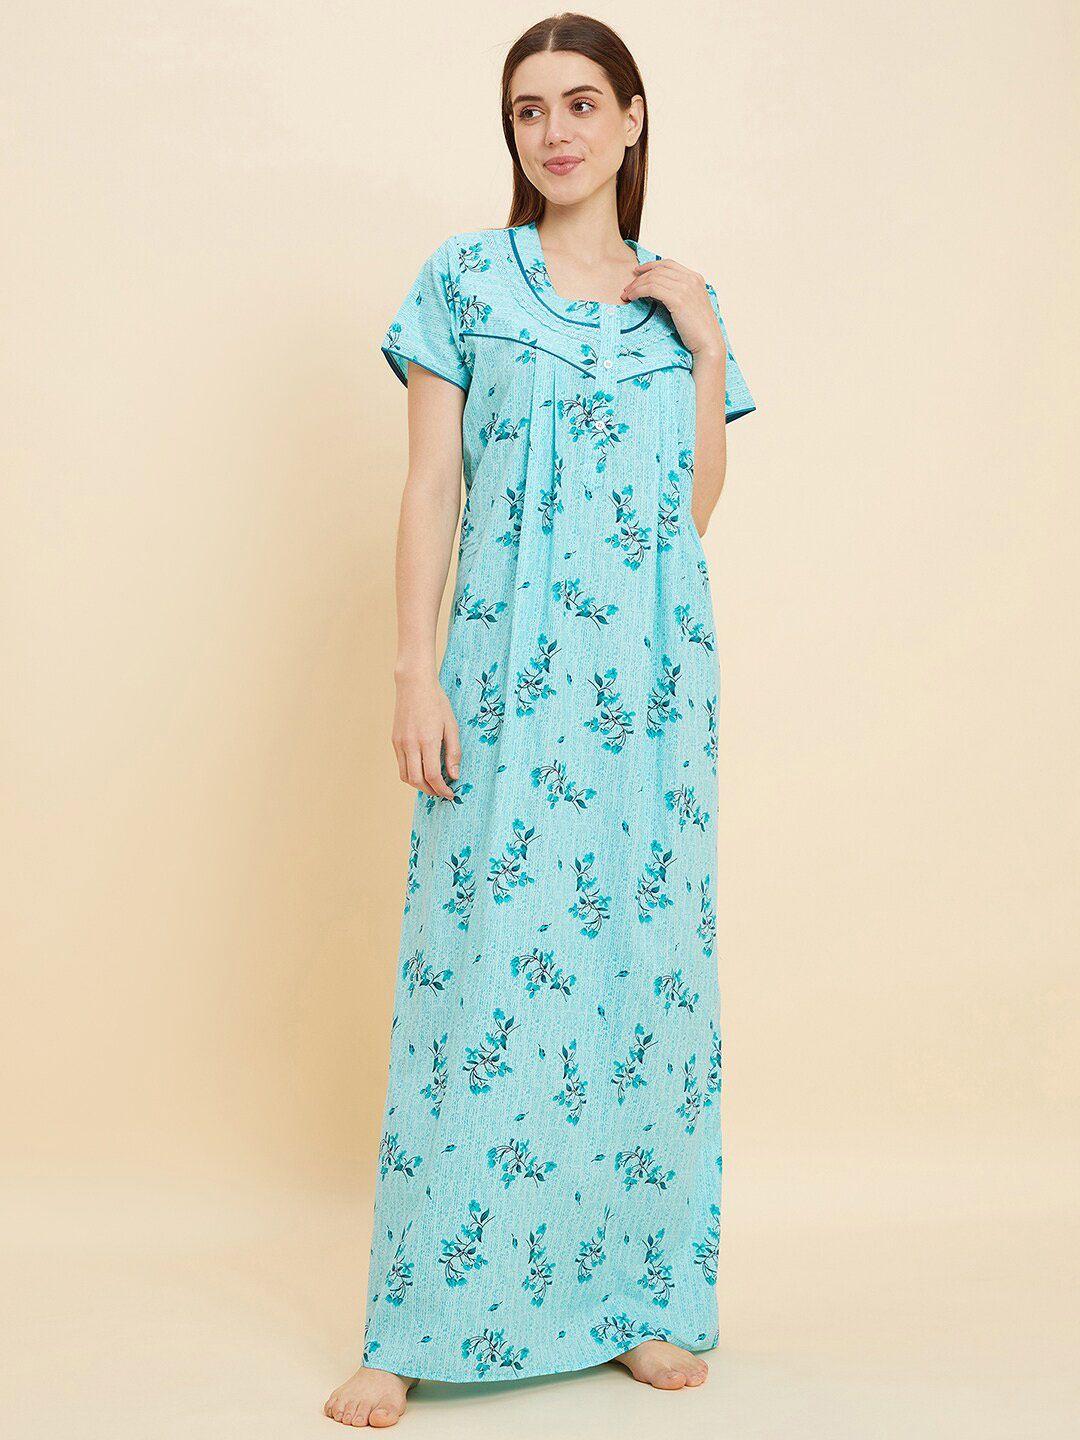 sweet-dreams-turquoise-blue-floral-printed-pure-cotton-maxi-nightdress